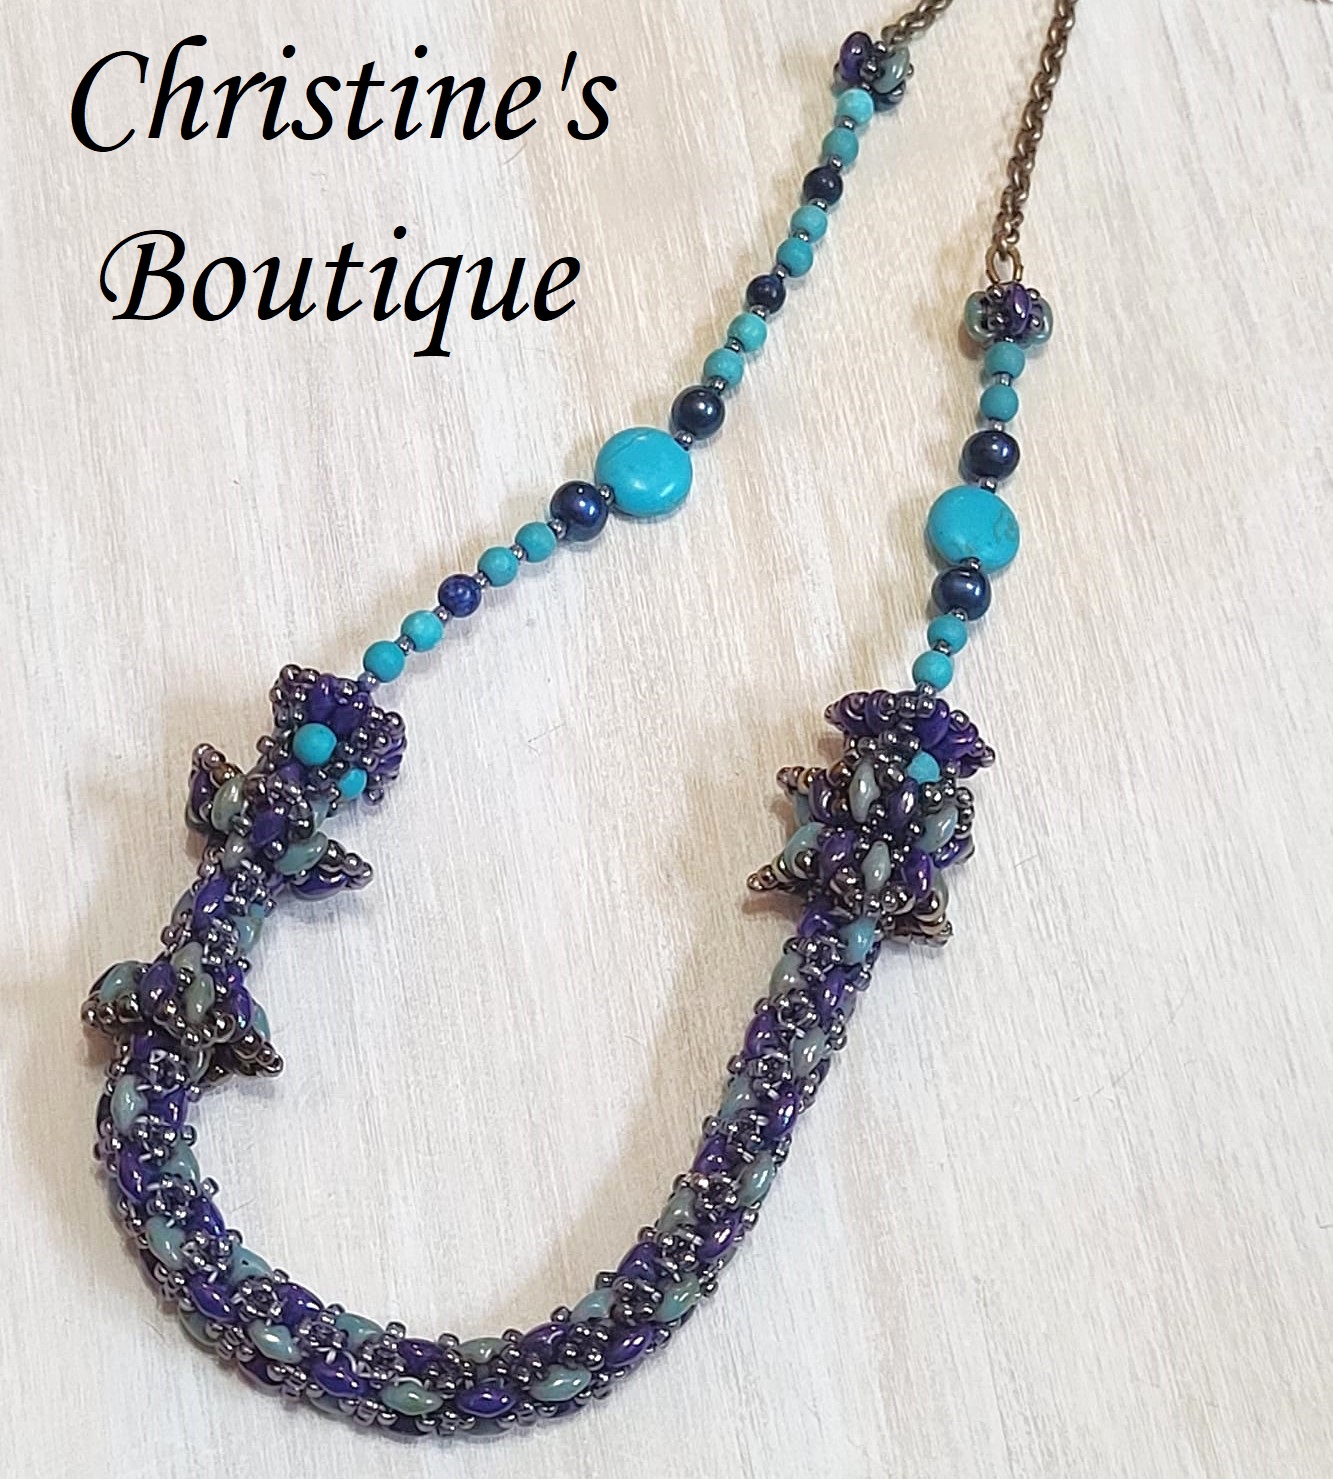 Handcrafted Beaded Necklace, Howilite and Lapis Gemstones